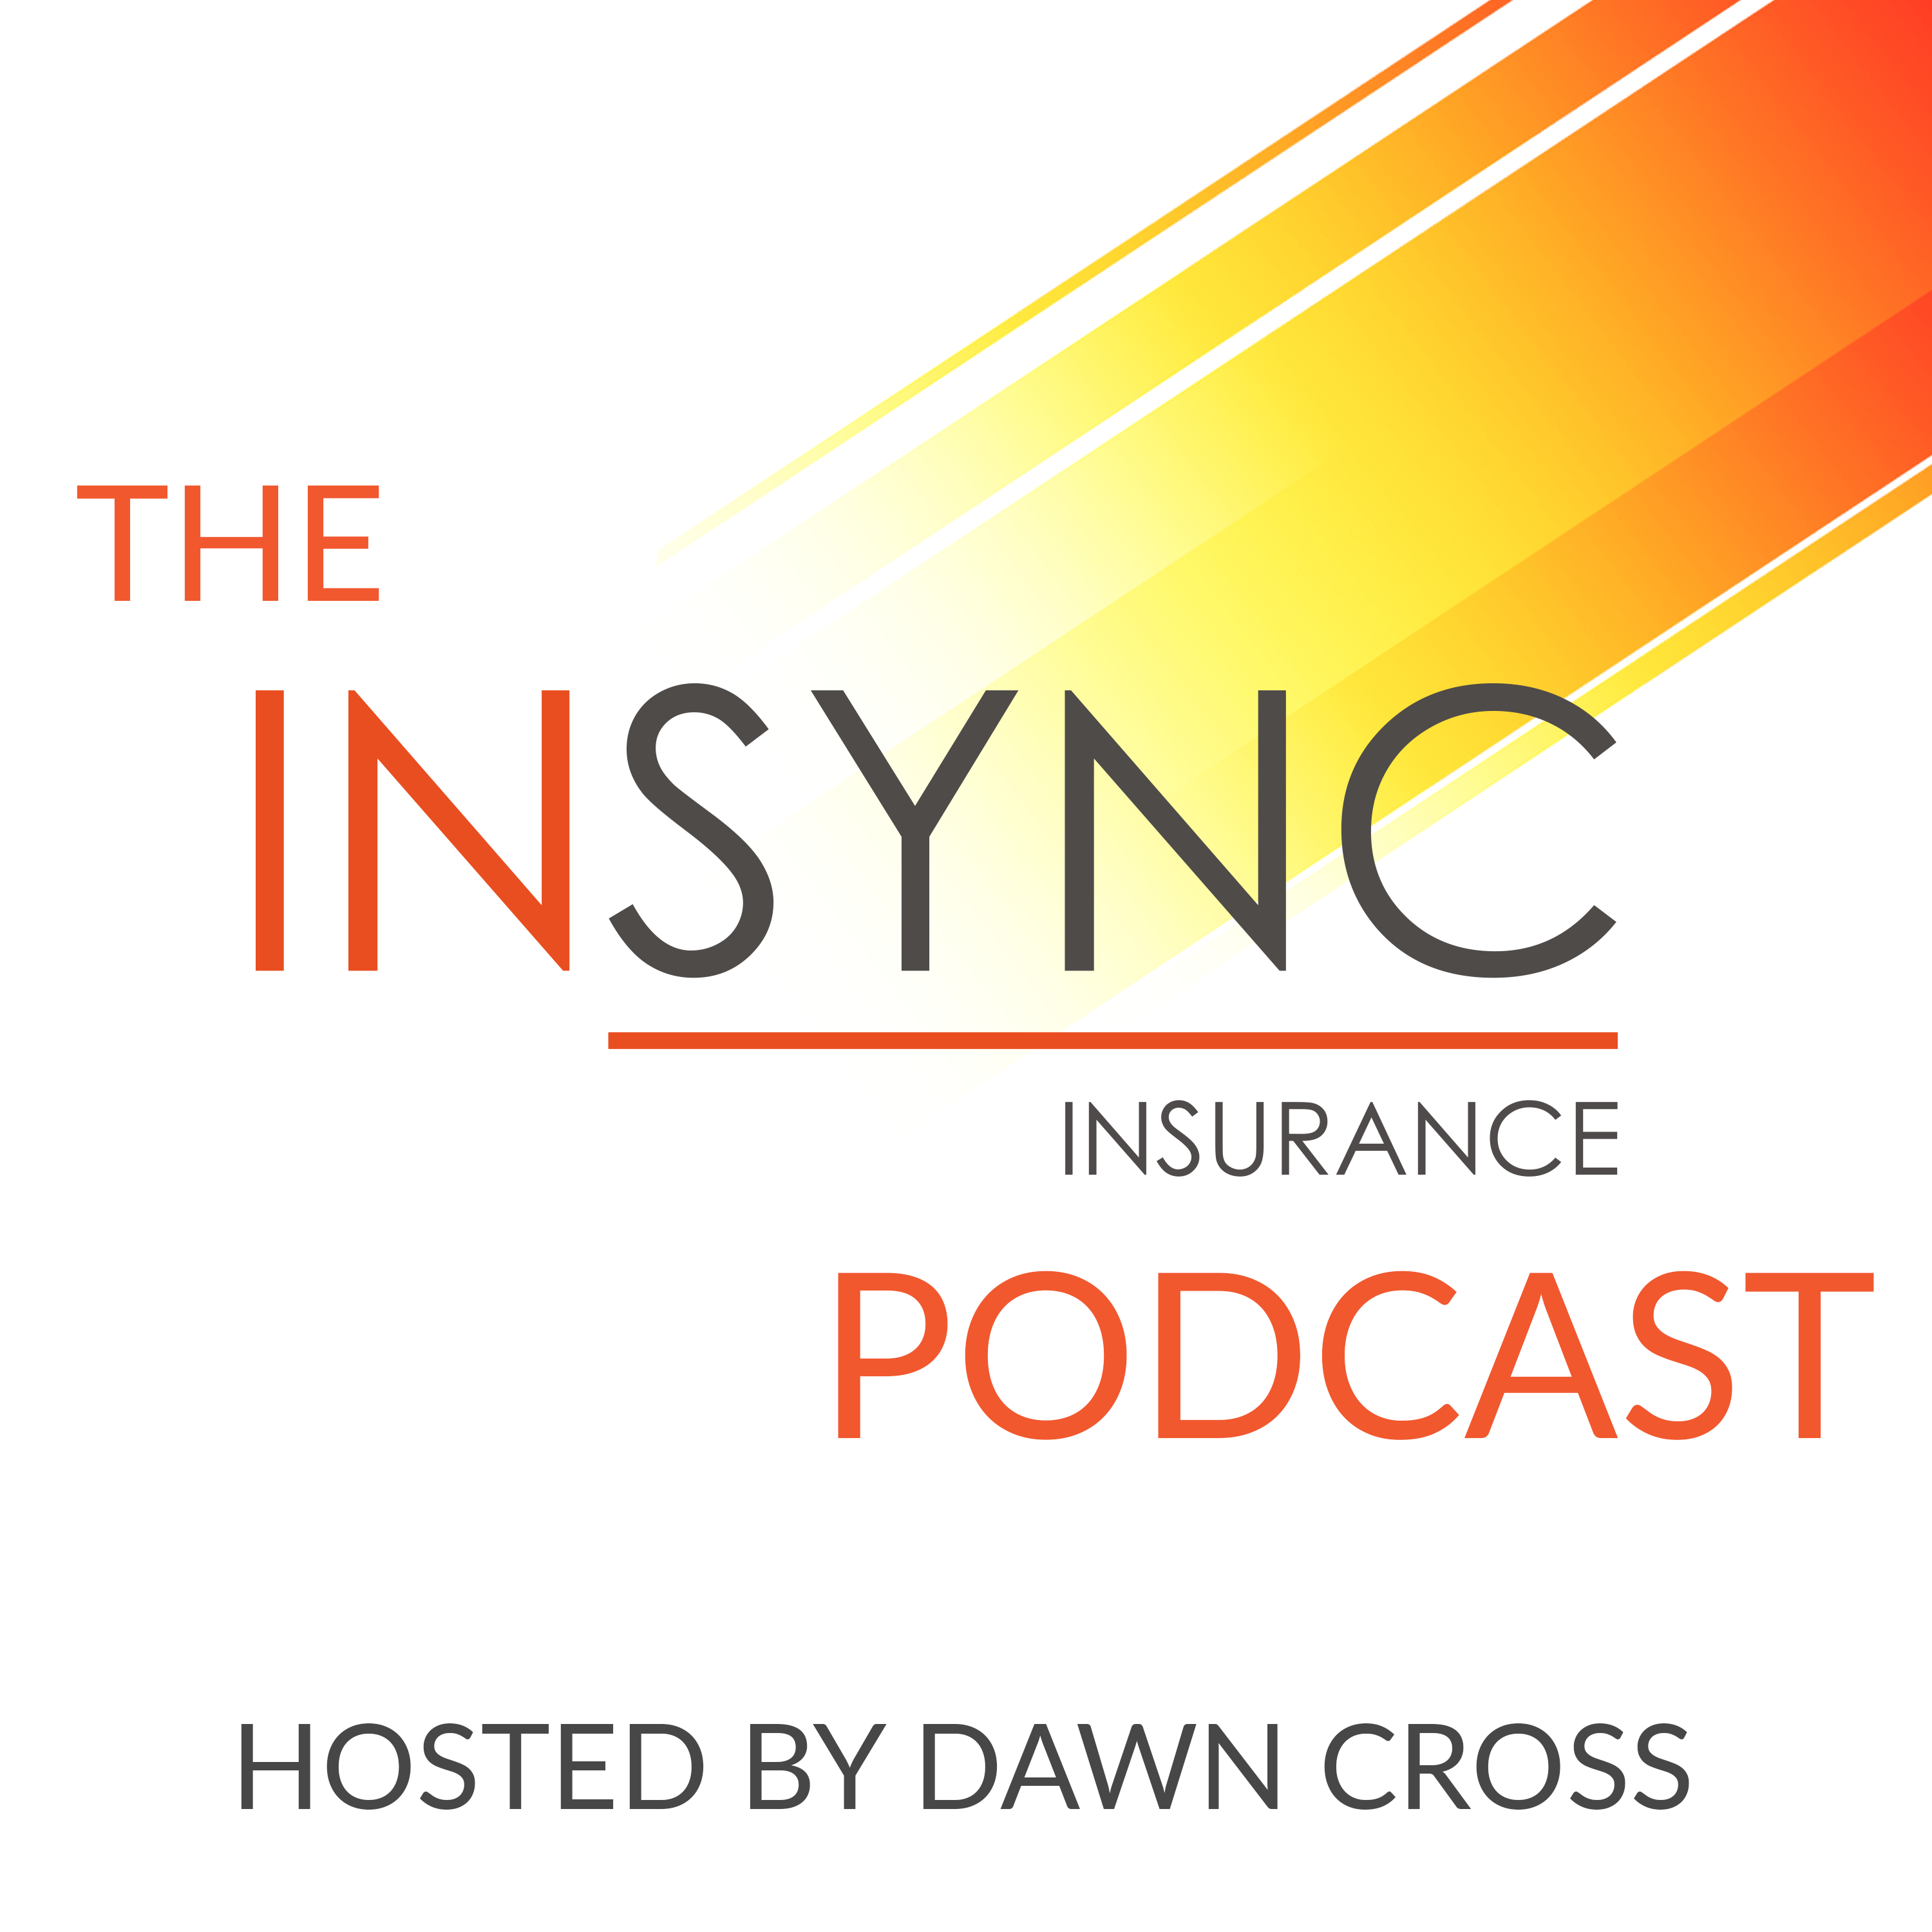 The Insync Insurance Podcast